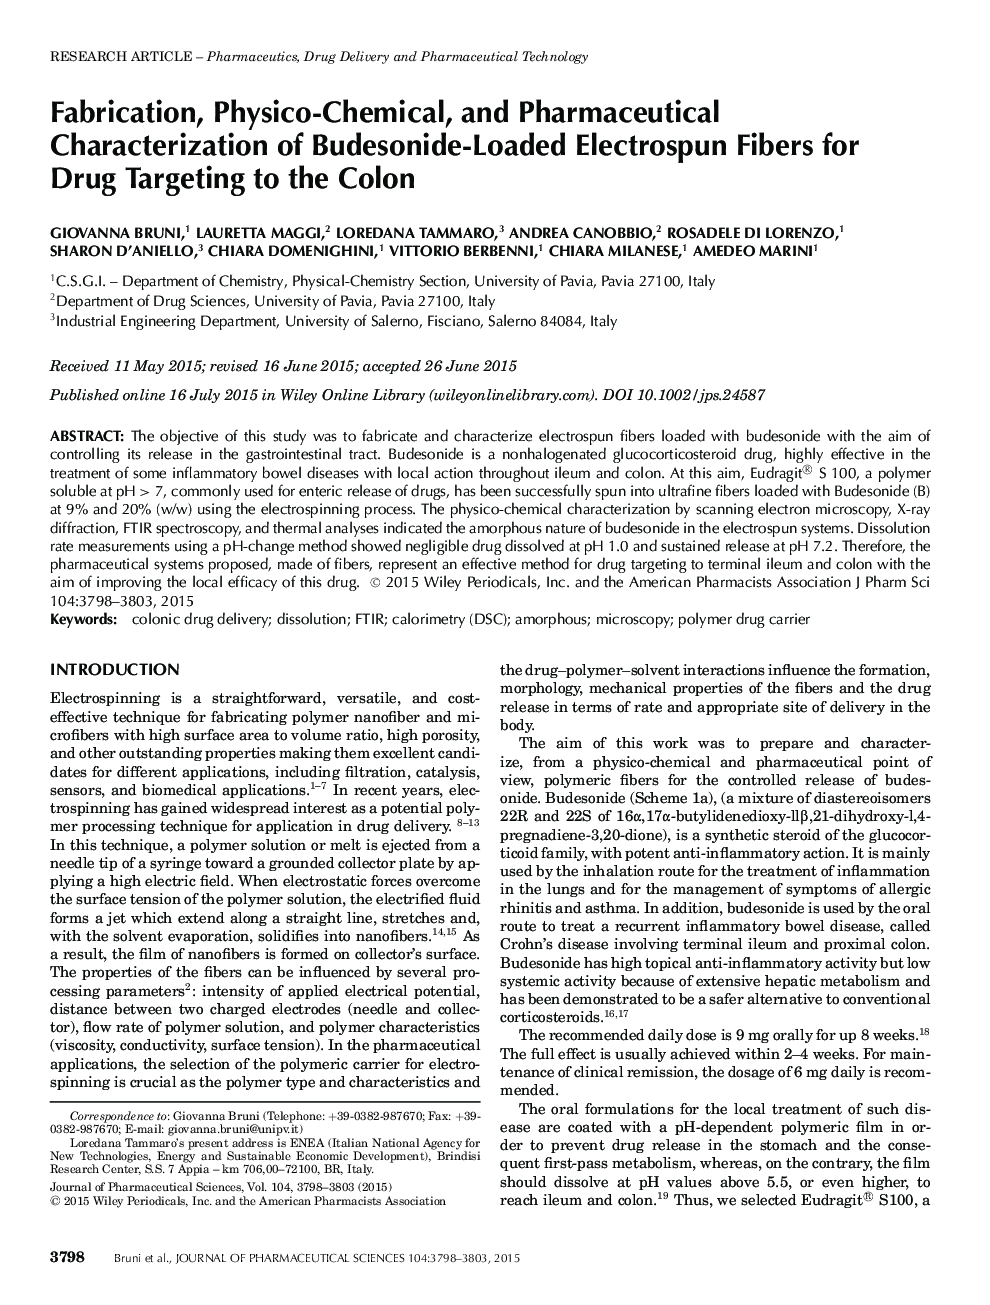 Fabrication, Physico-Chemical, and Pharmaceutical Characterization of Budesonide-Loaded Electrospun Fibers for Drug Targeting to the Colon